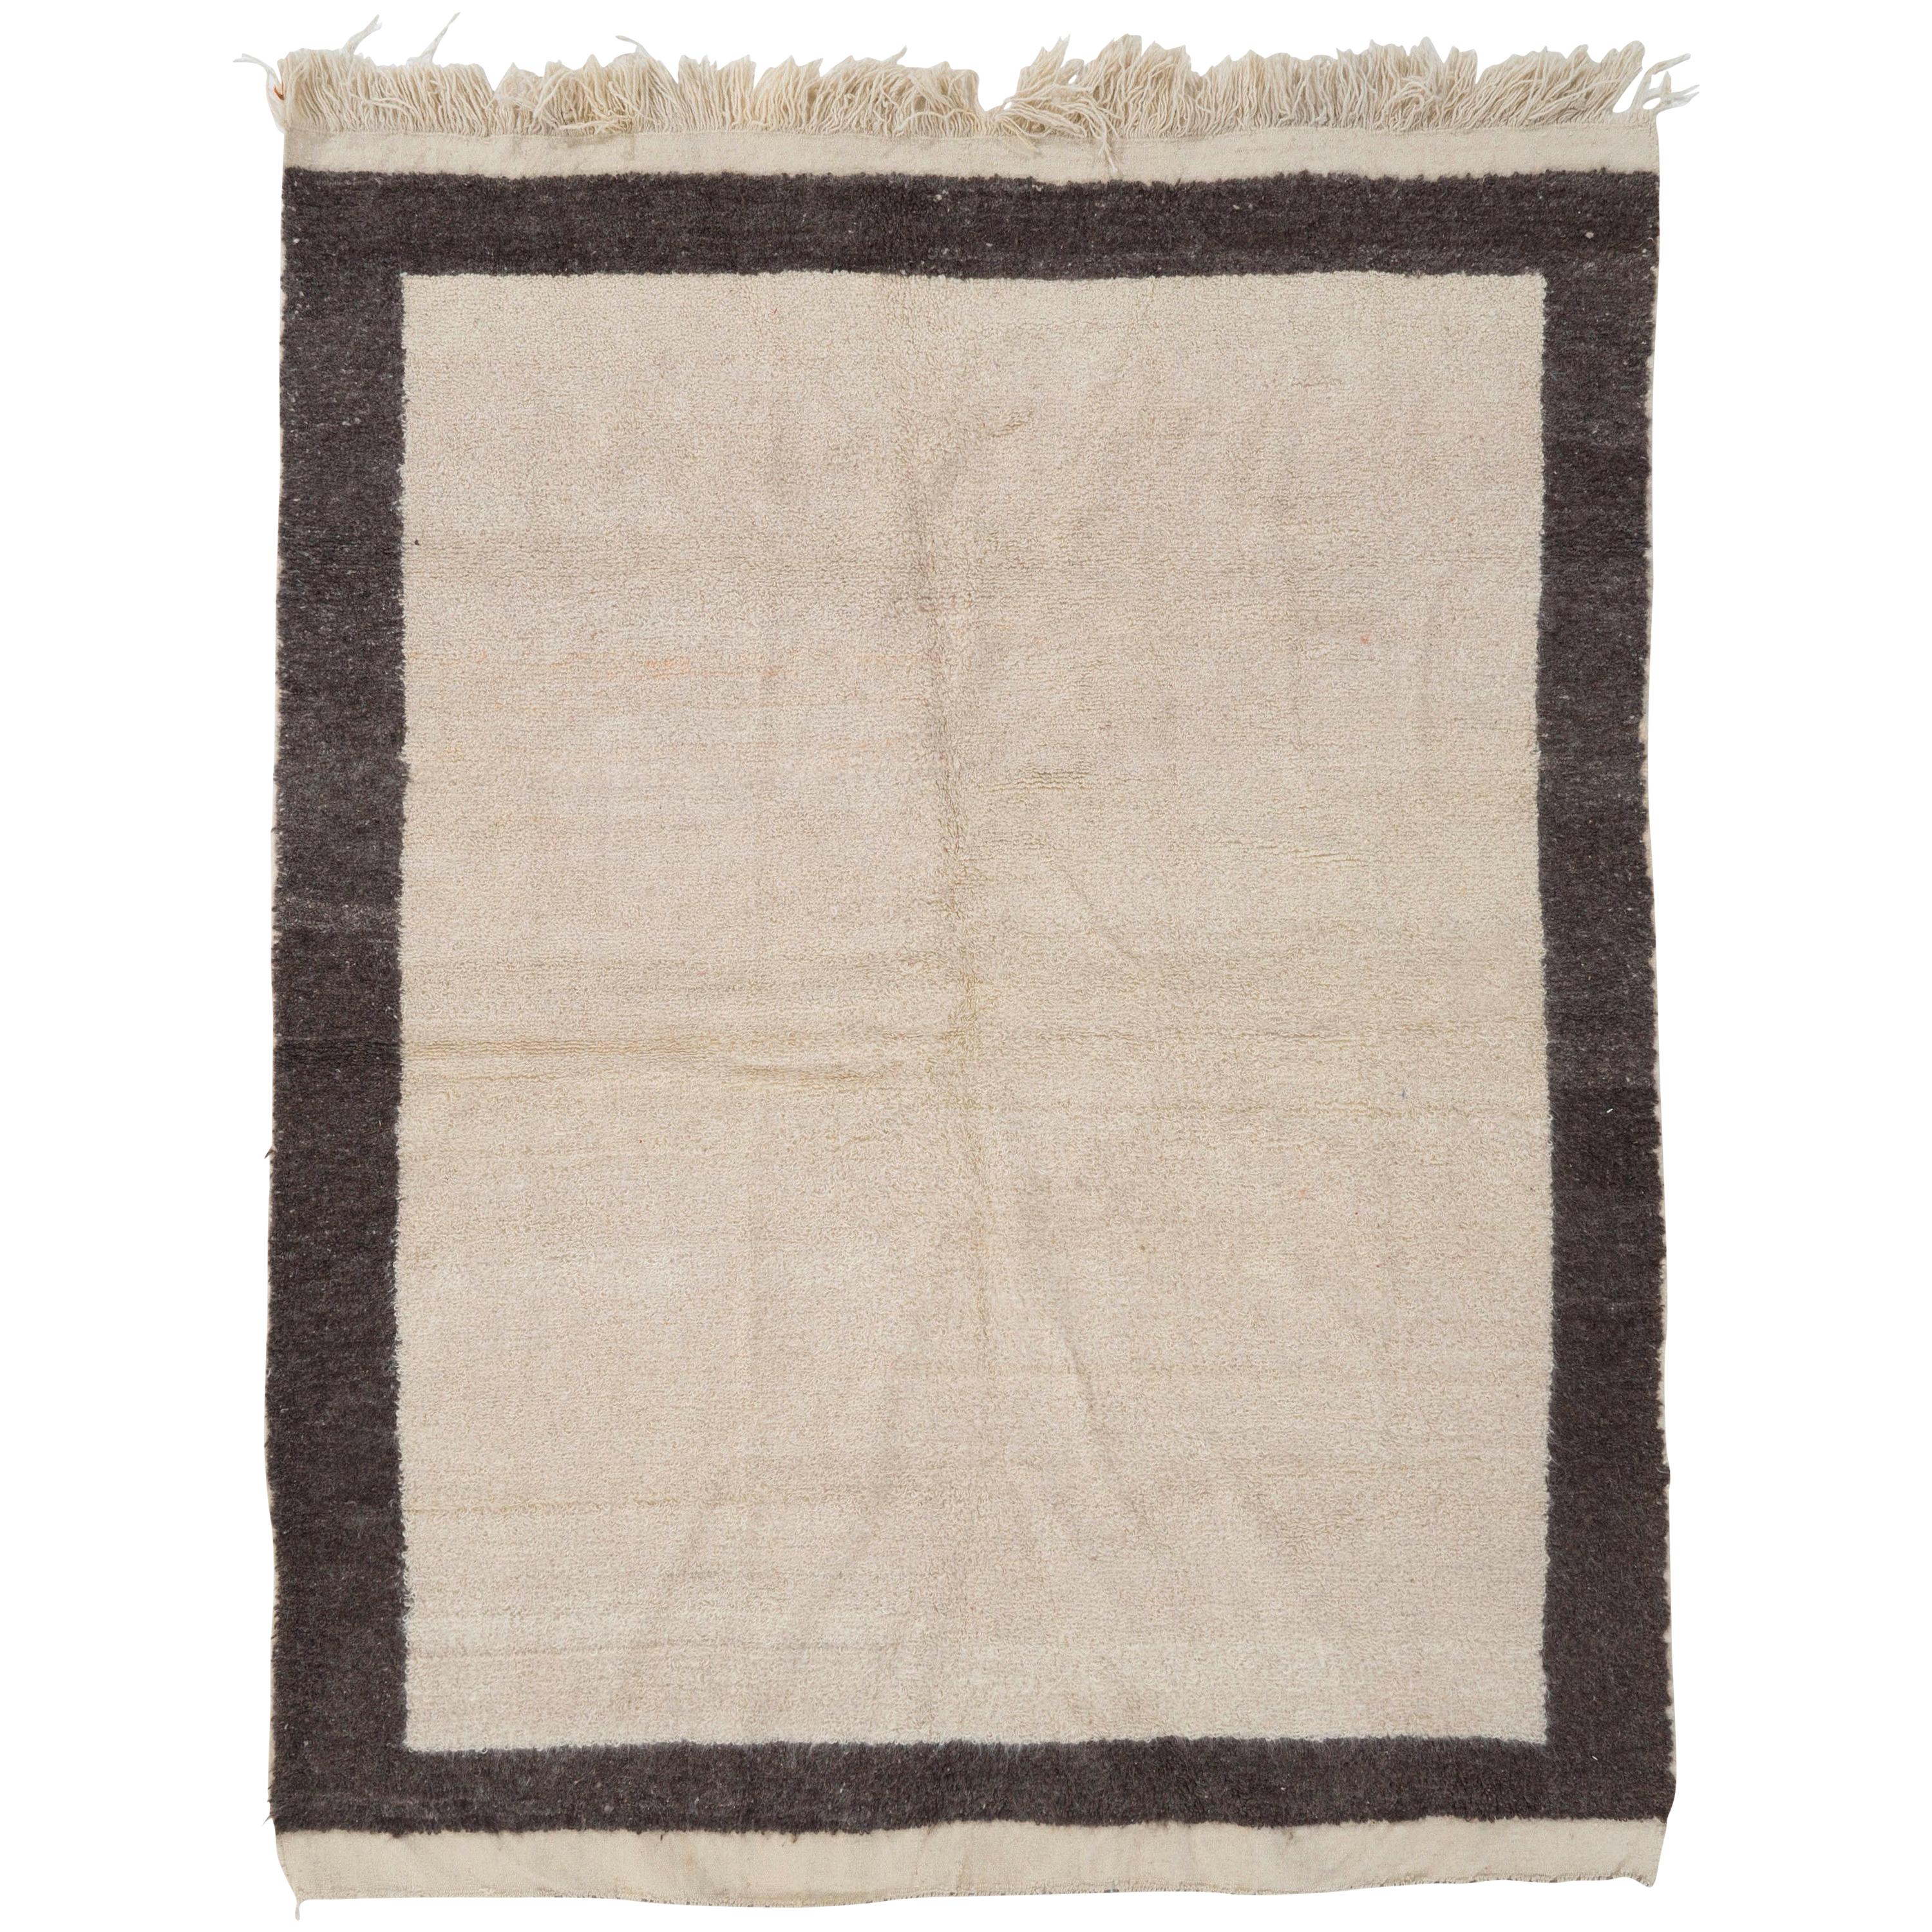 5x6 Vintage Tulu Rug Made of Natural Un-dyed Cream and Gray Wool, Custom Options